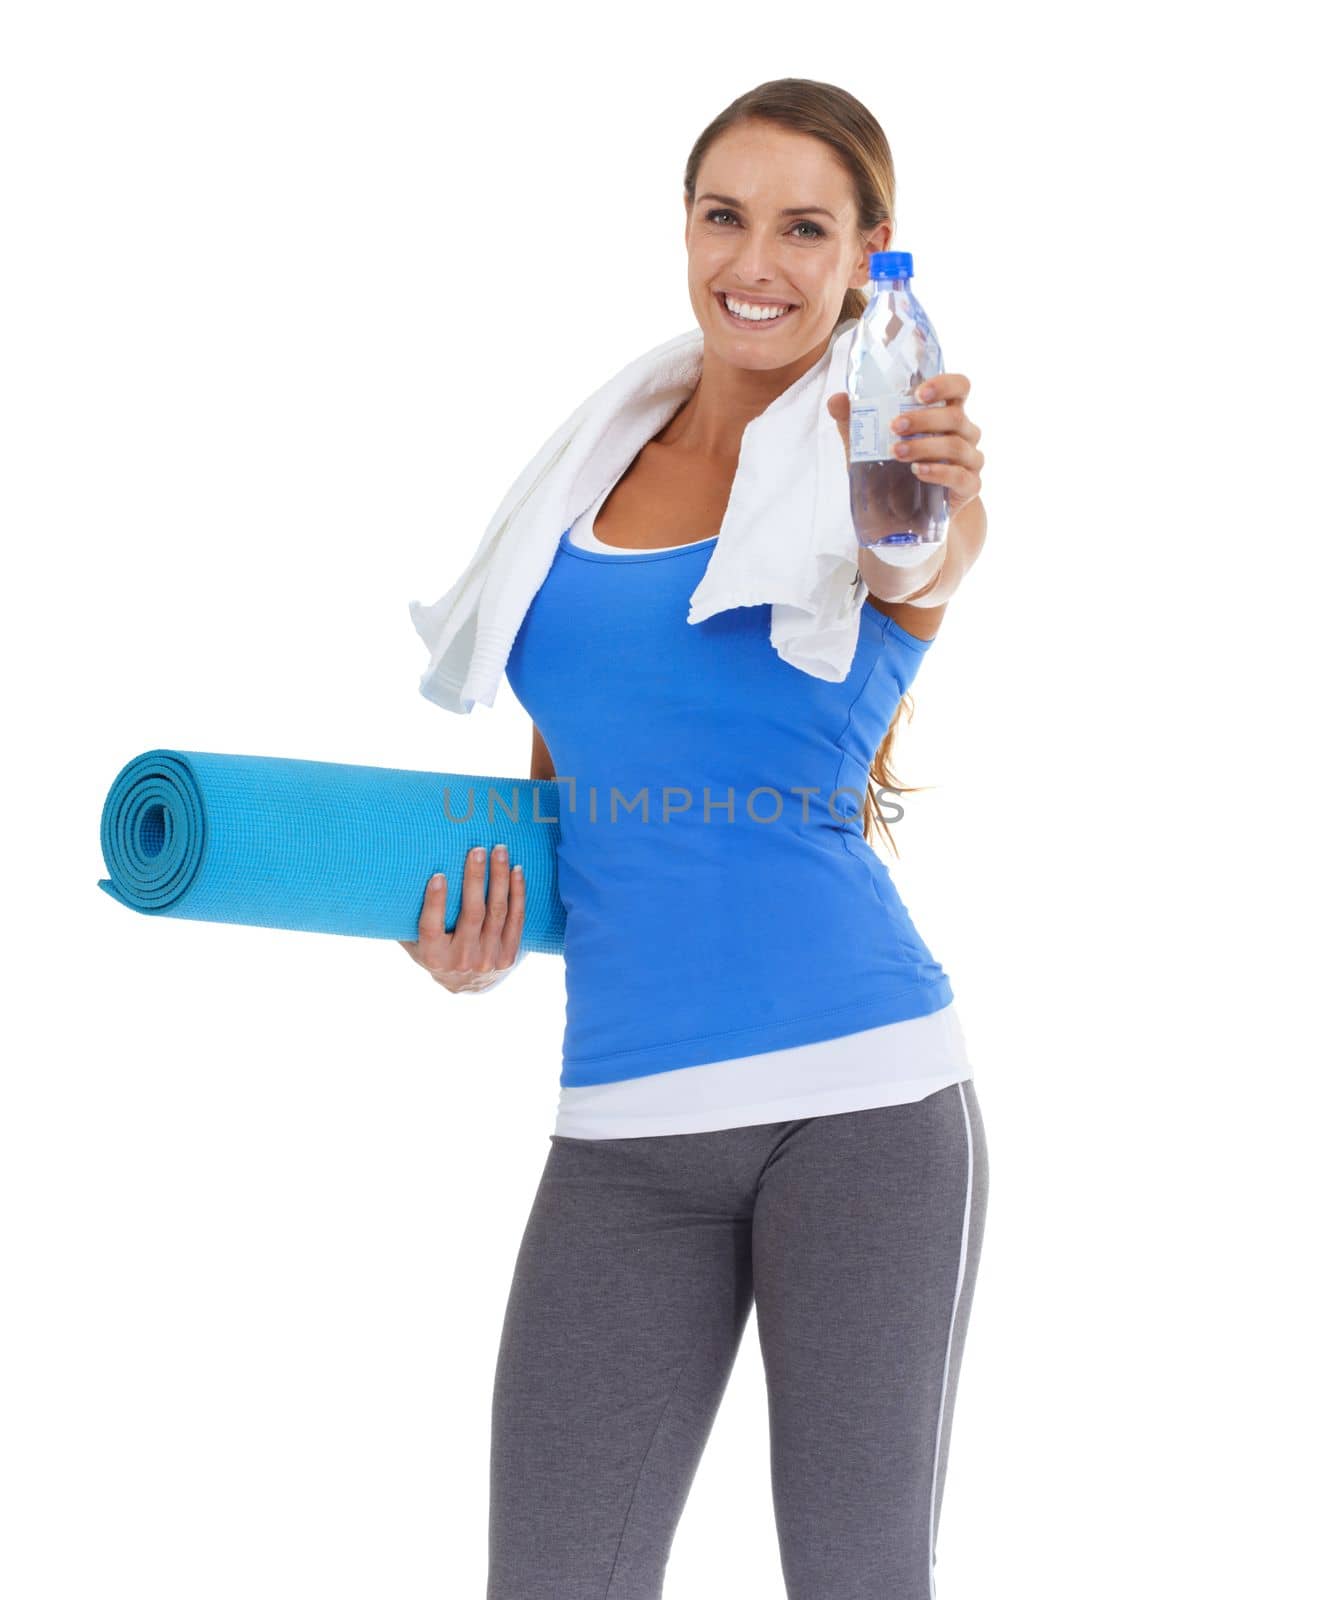 Keep water at the ready - Health tips. Fit young woman holding a pilates mat and water bottle with a smile - isolated on white. by YuriArcurs